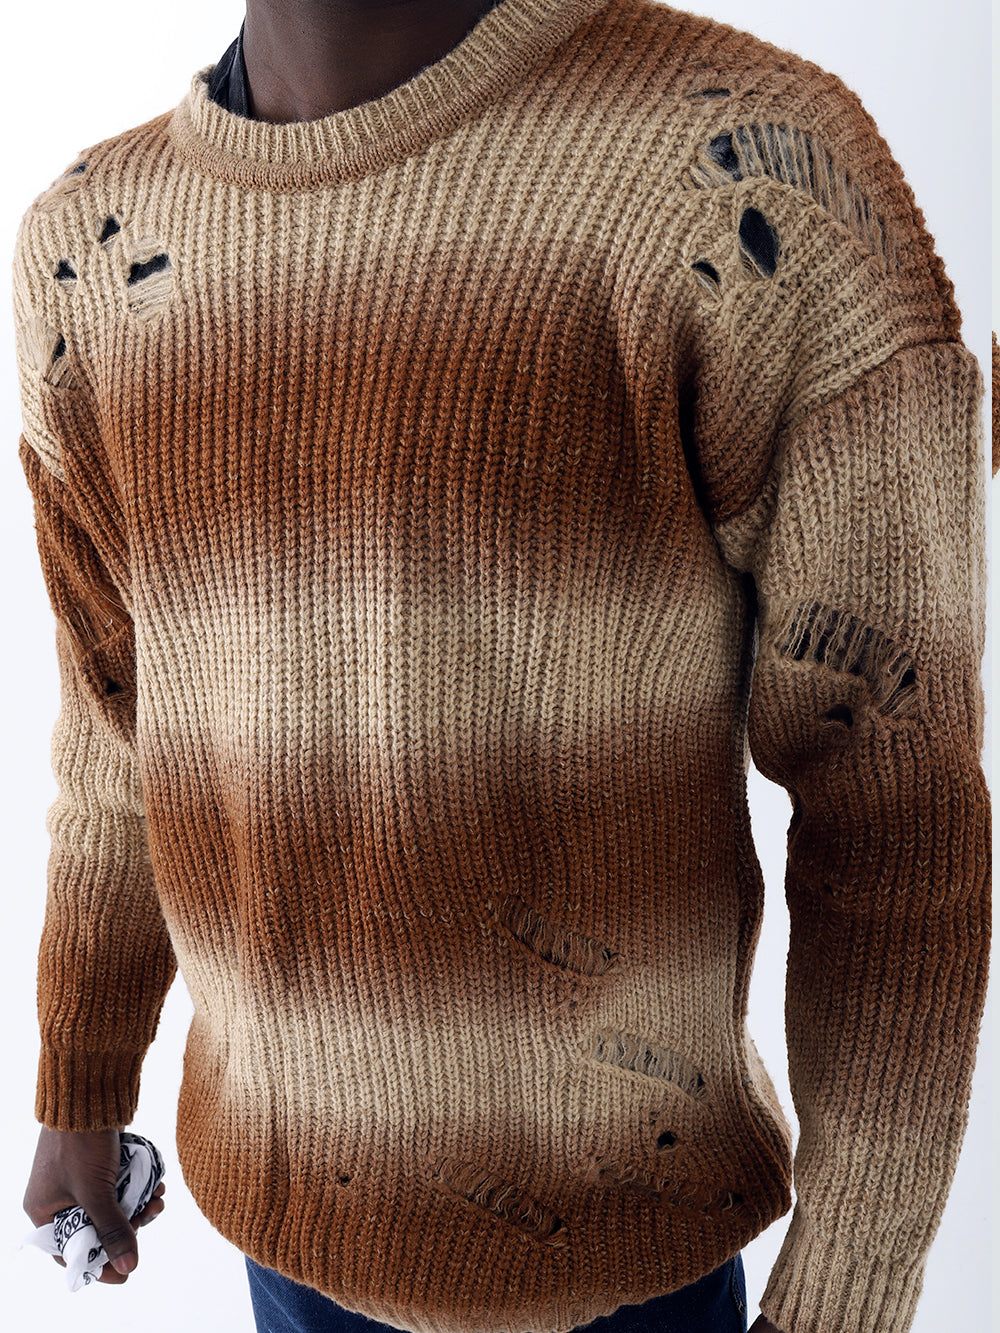 A man wearing a Distressed Gentleman Sweater in brown and tan made of acrylic.